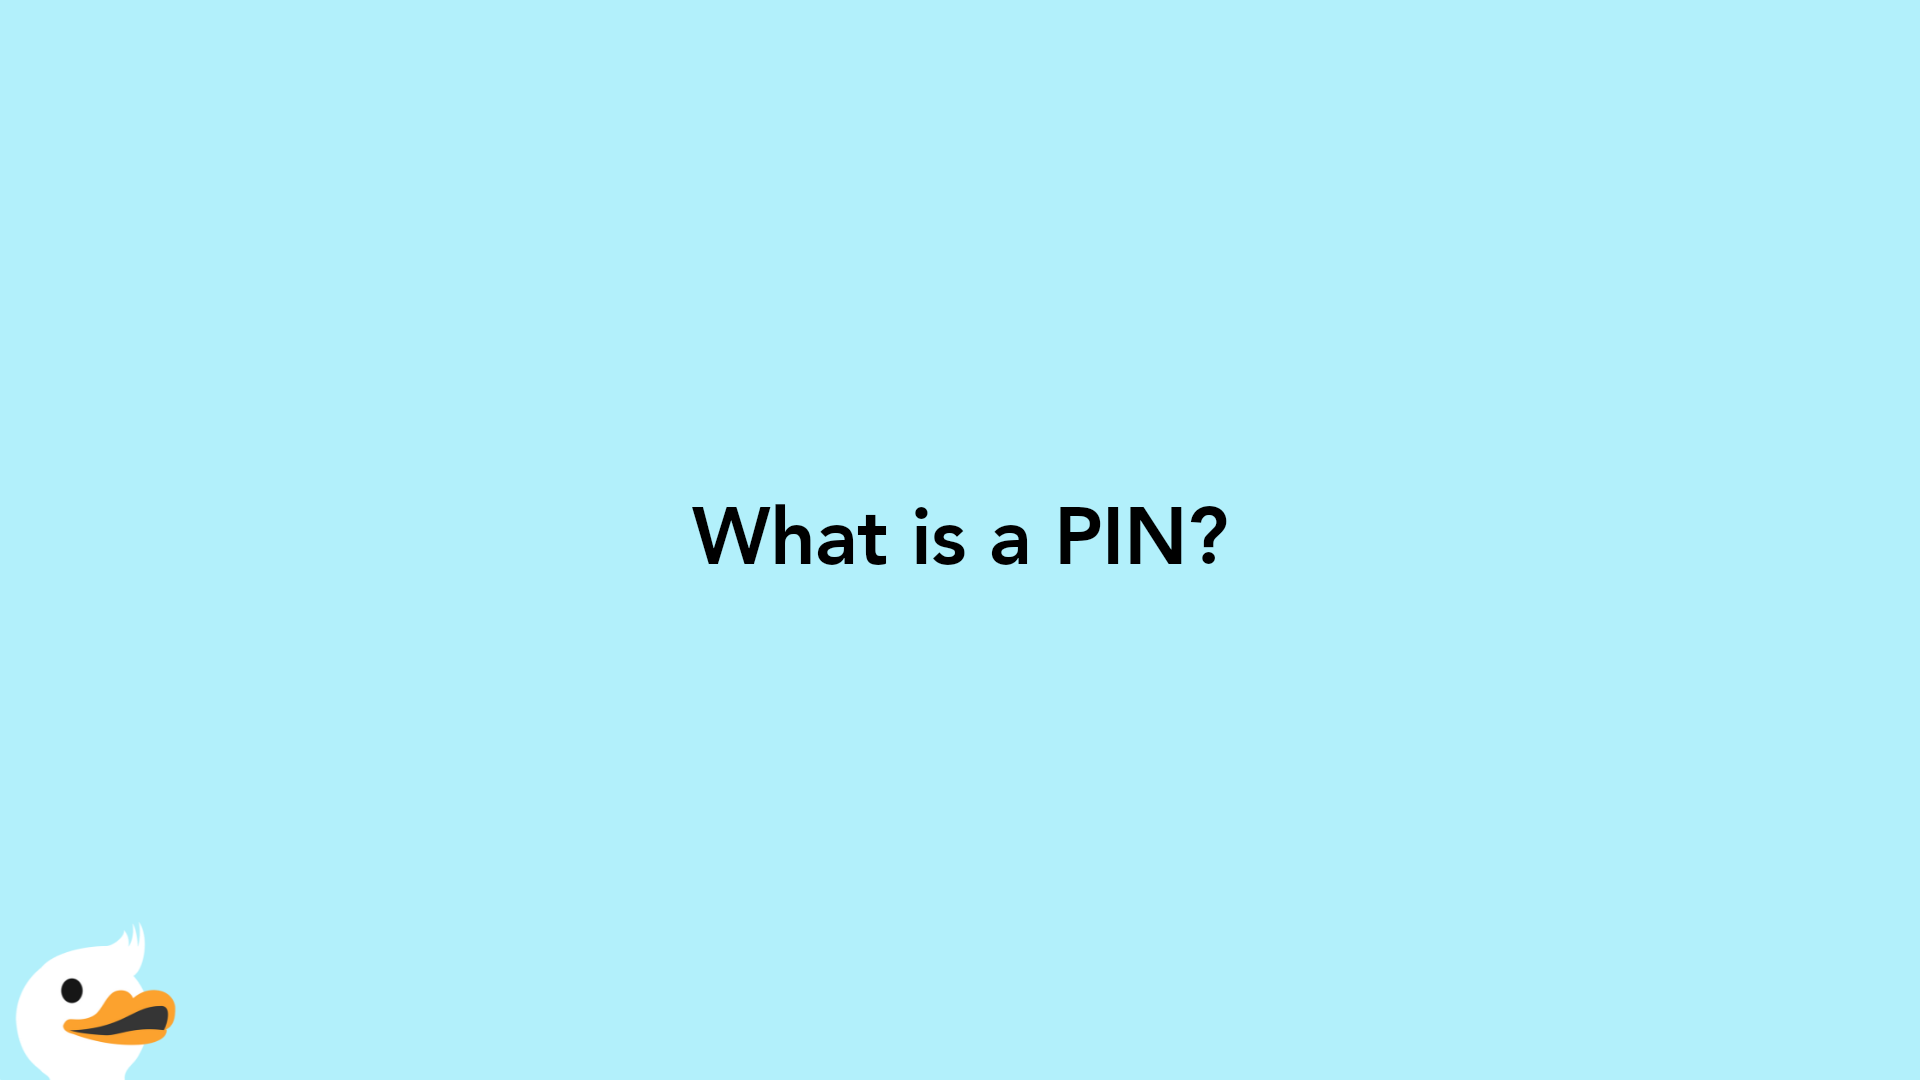 What is a PIN?